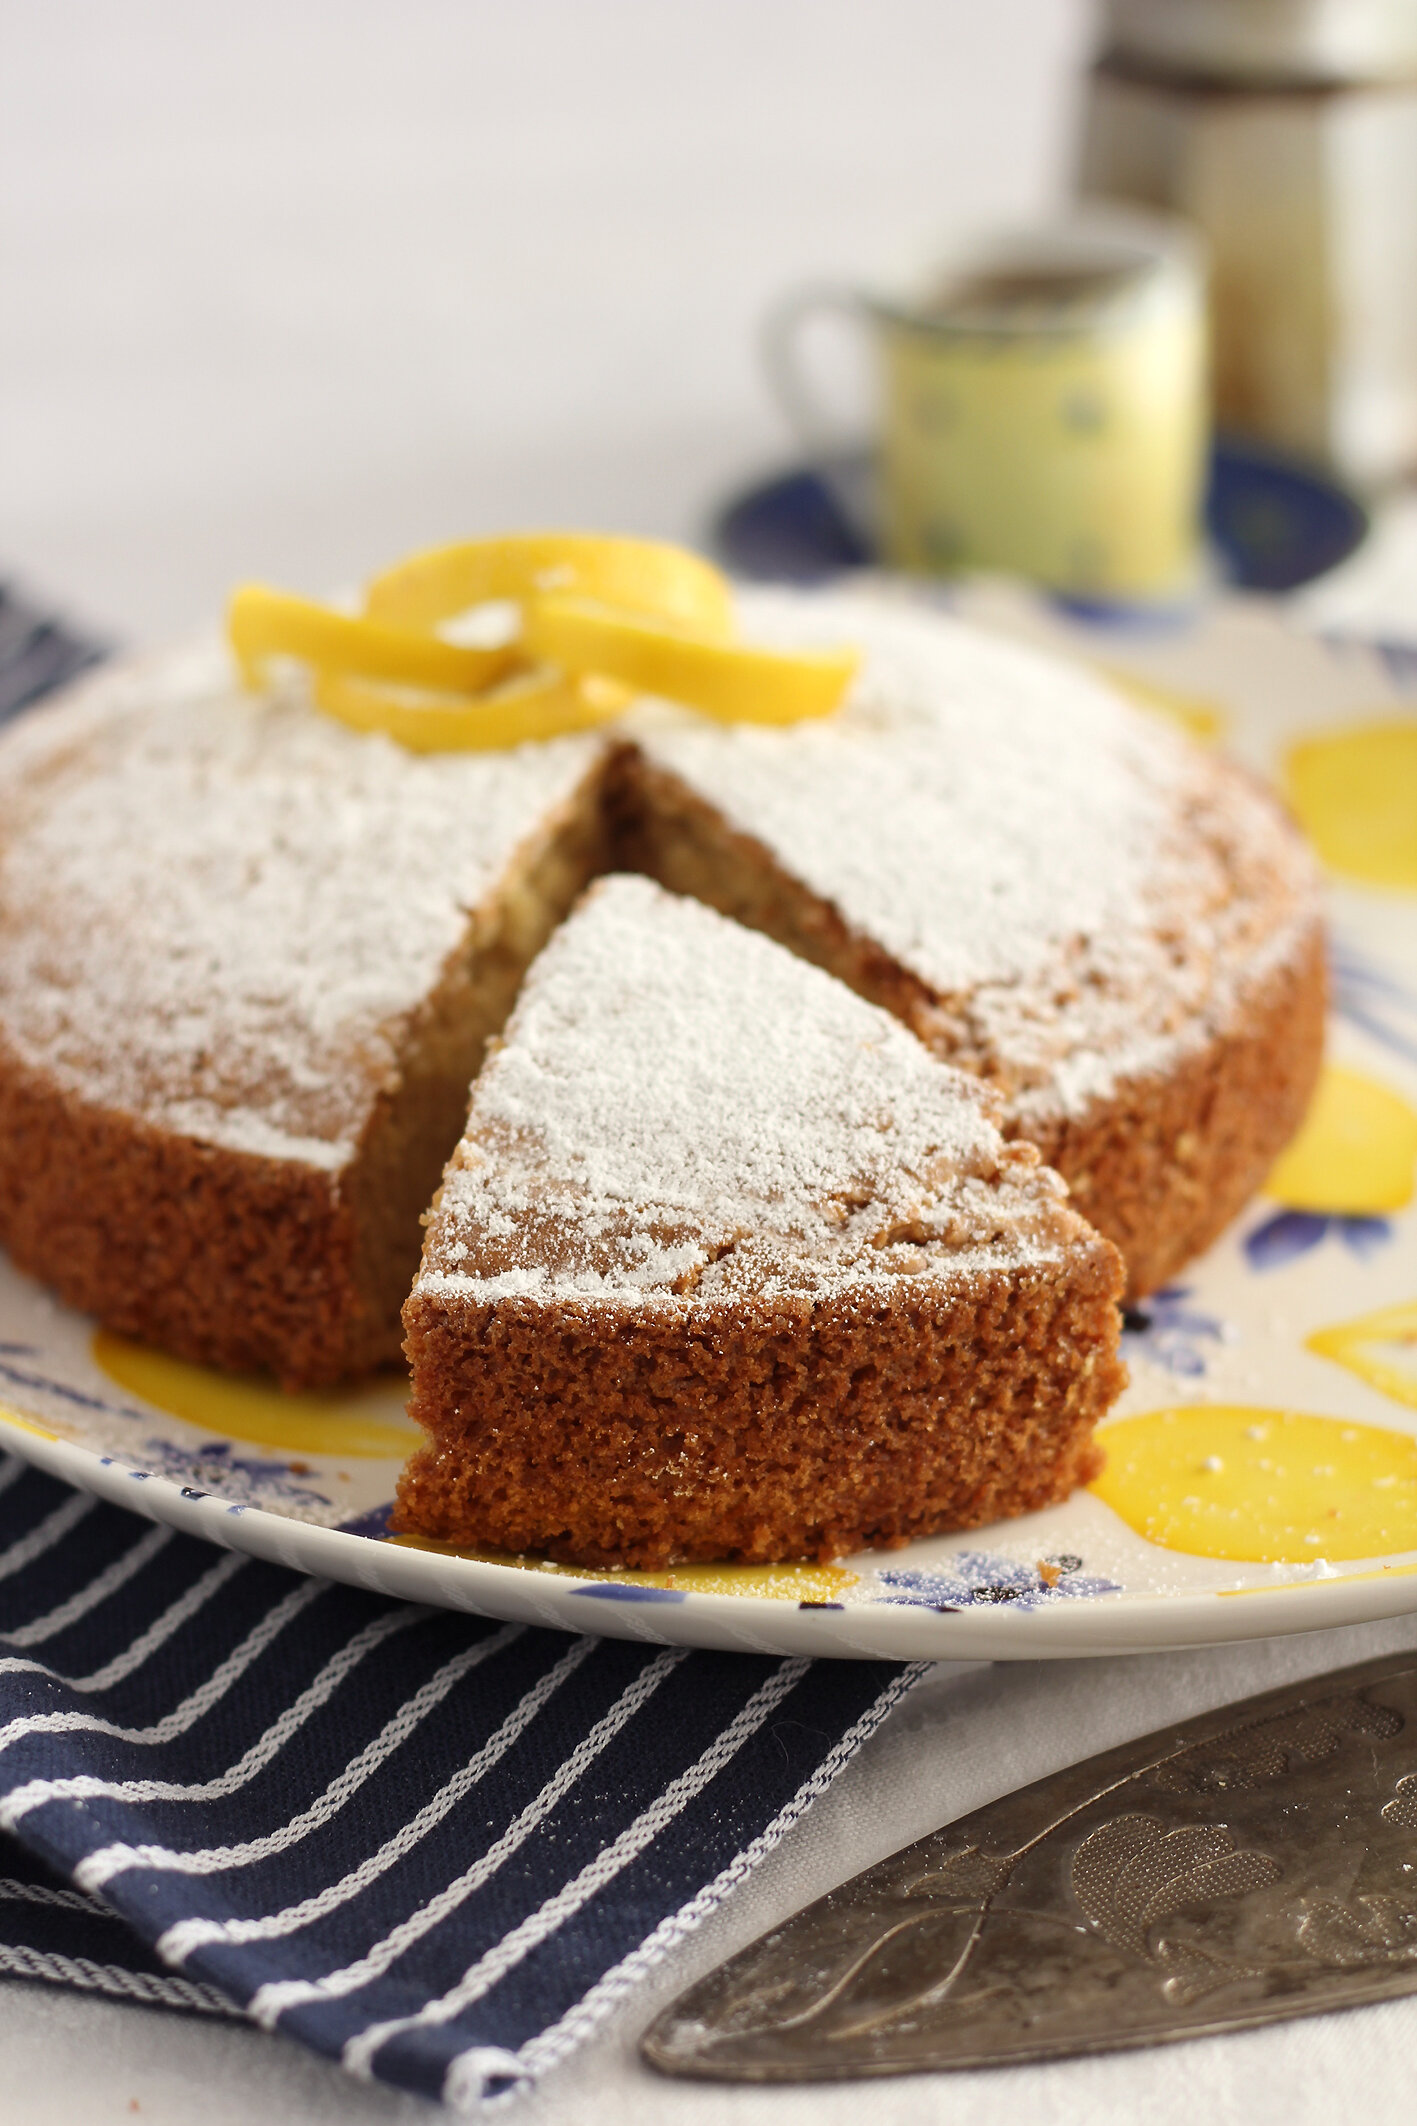 The Vegan Italian Kitchen's Olive Oil Cake | from $35 AUD per person